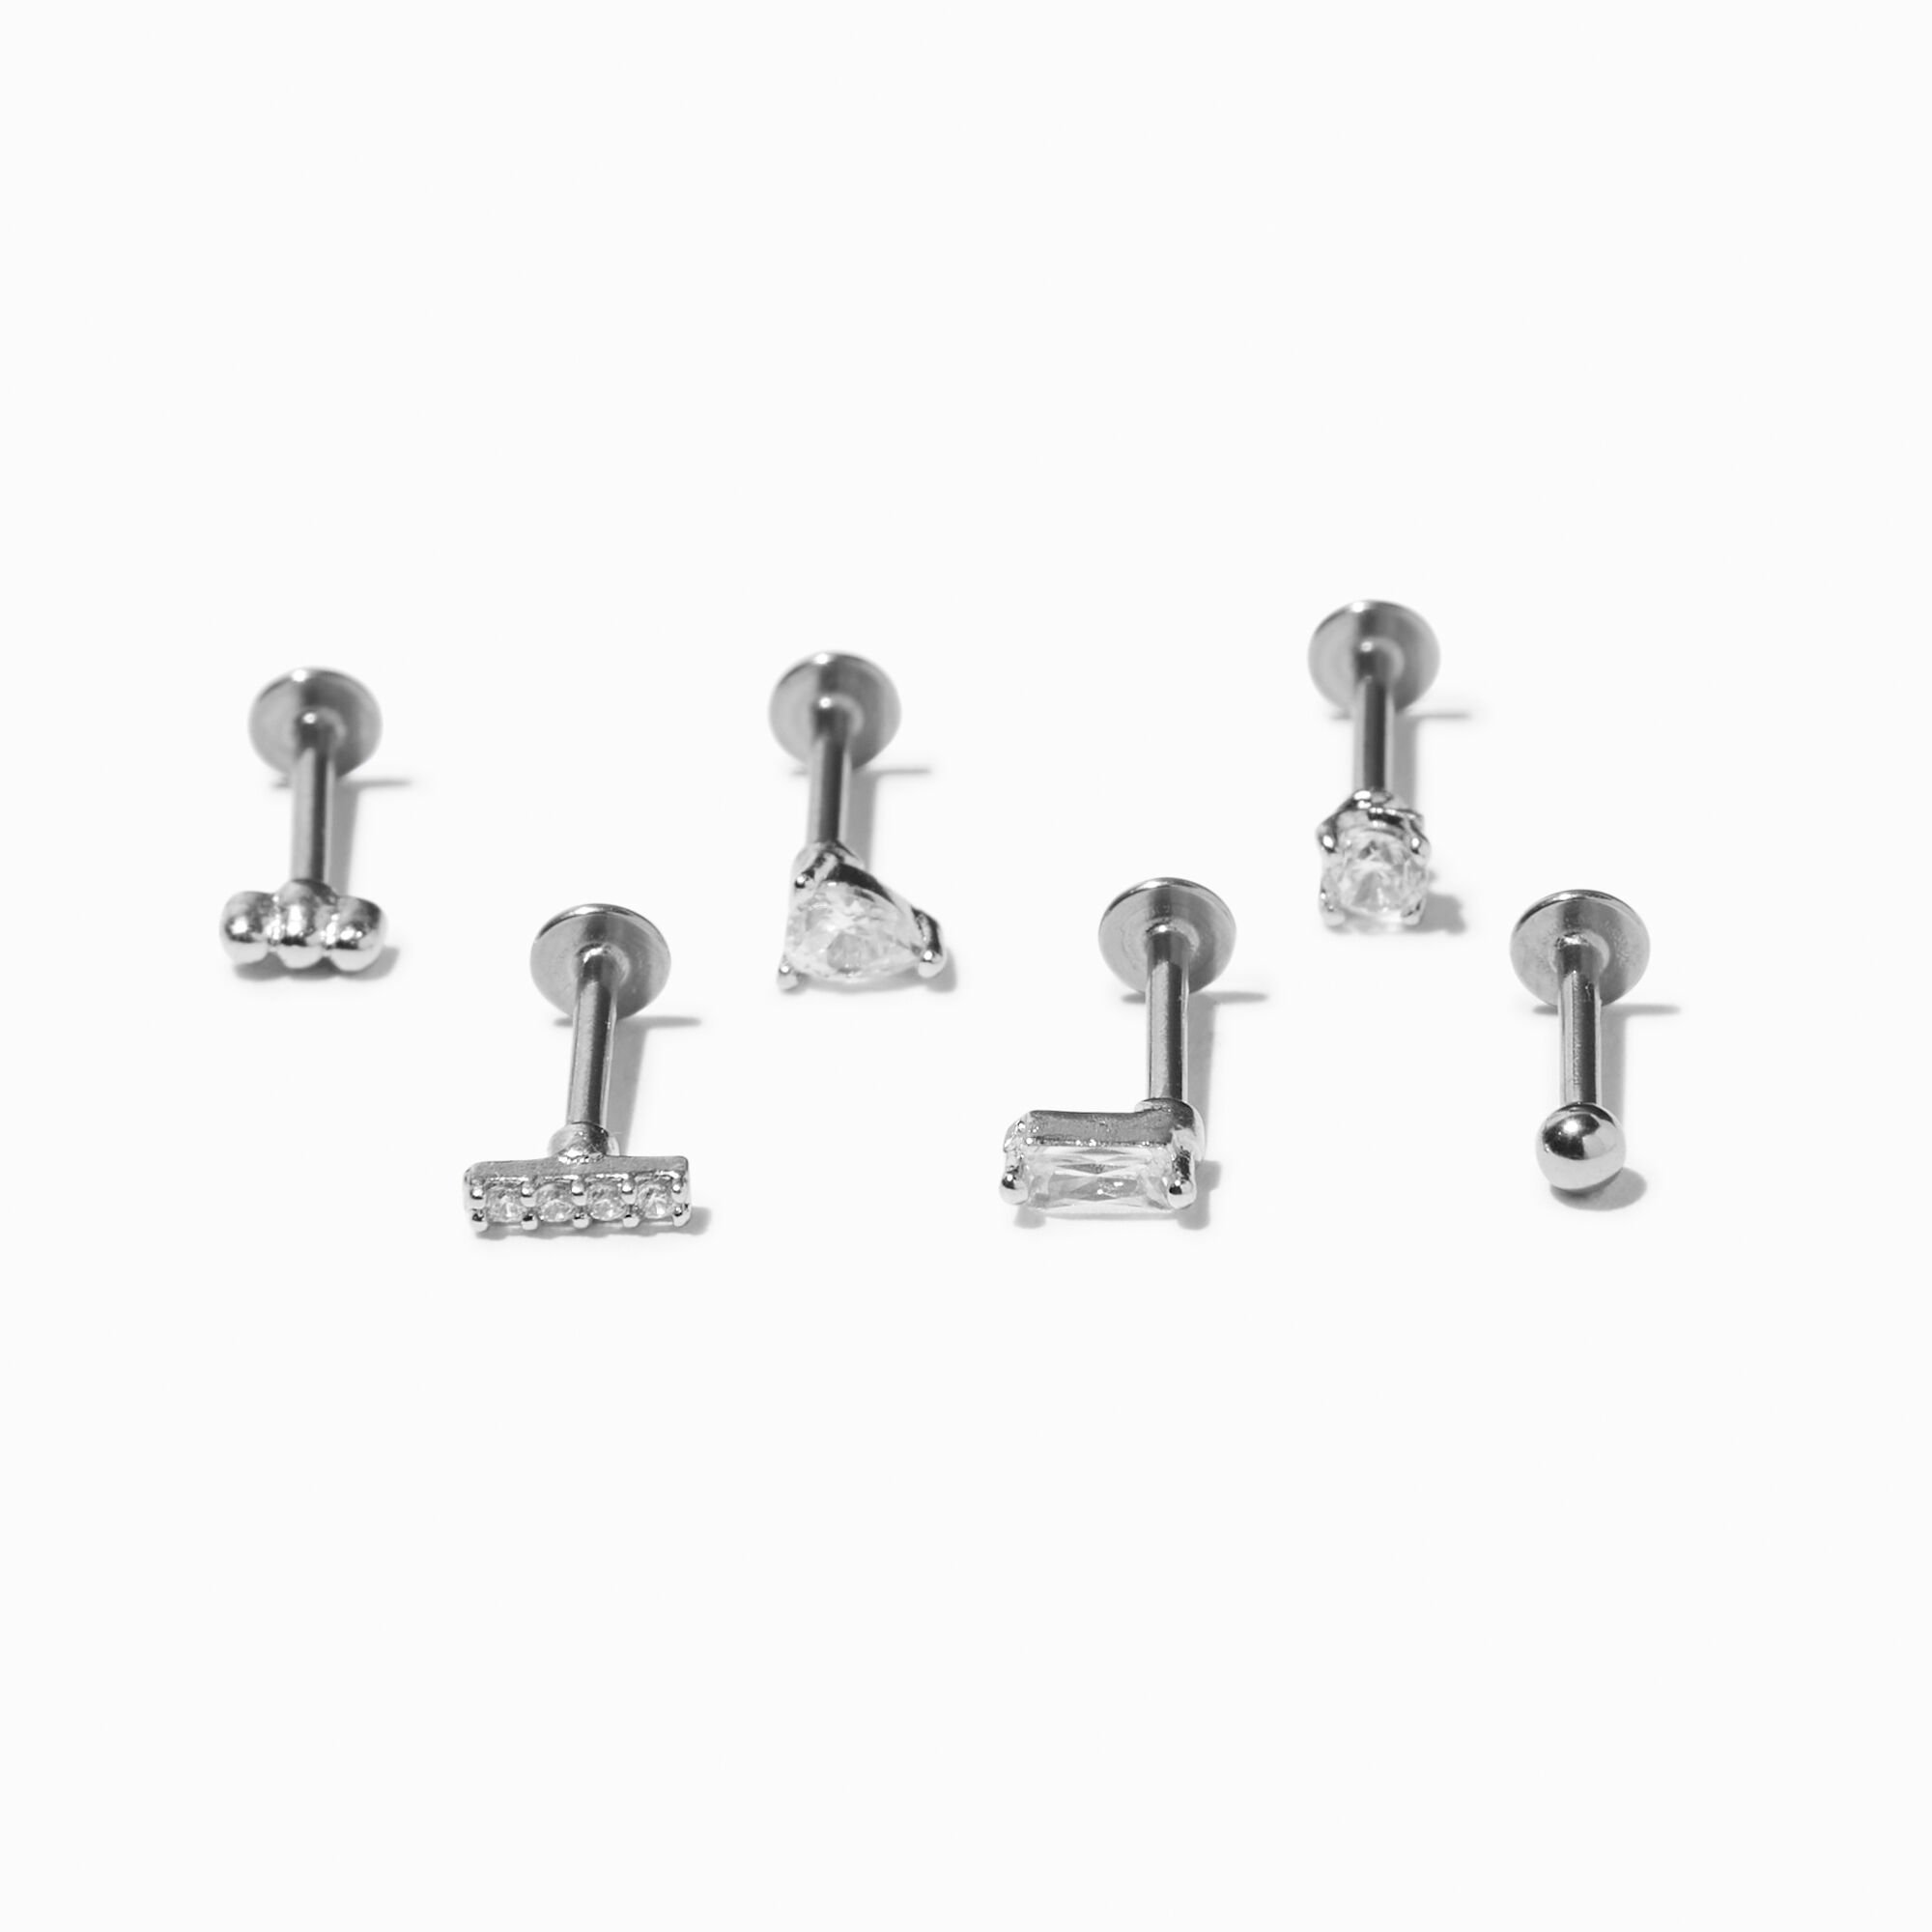 View Claires Geometric 16G Cartilage Earrings 3 Pack Silver information